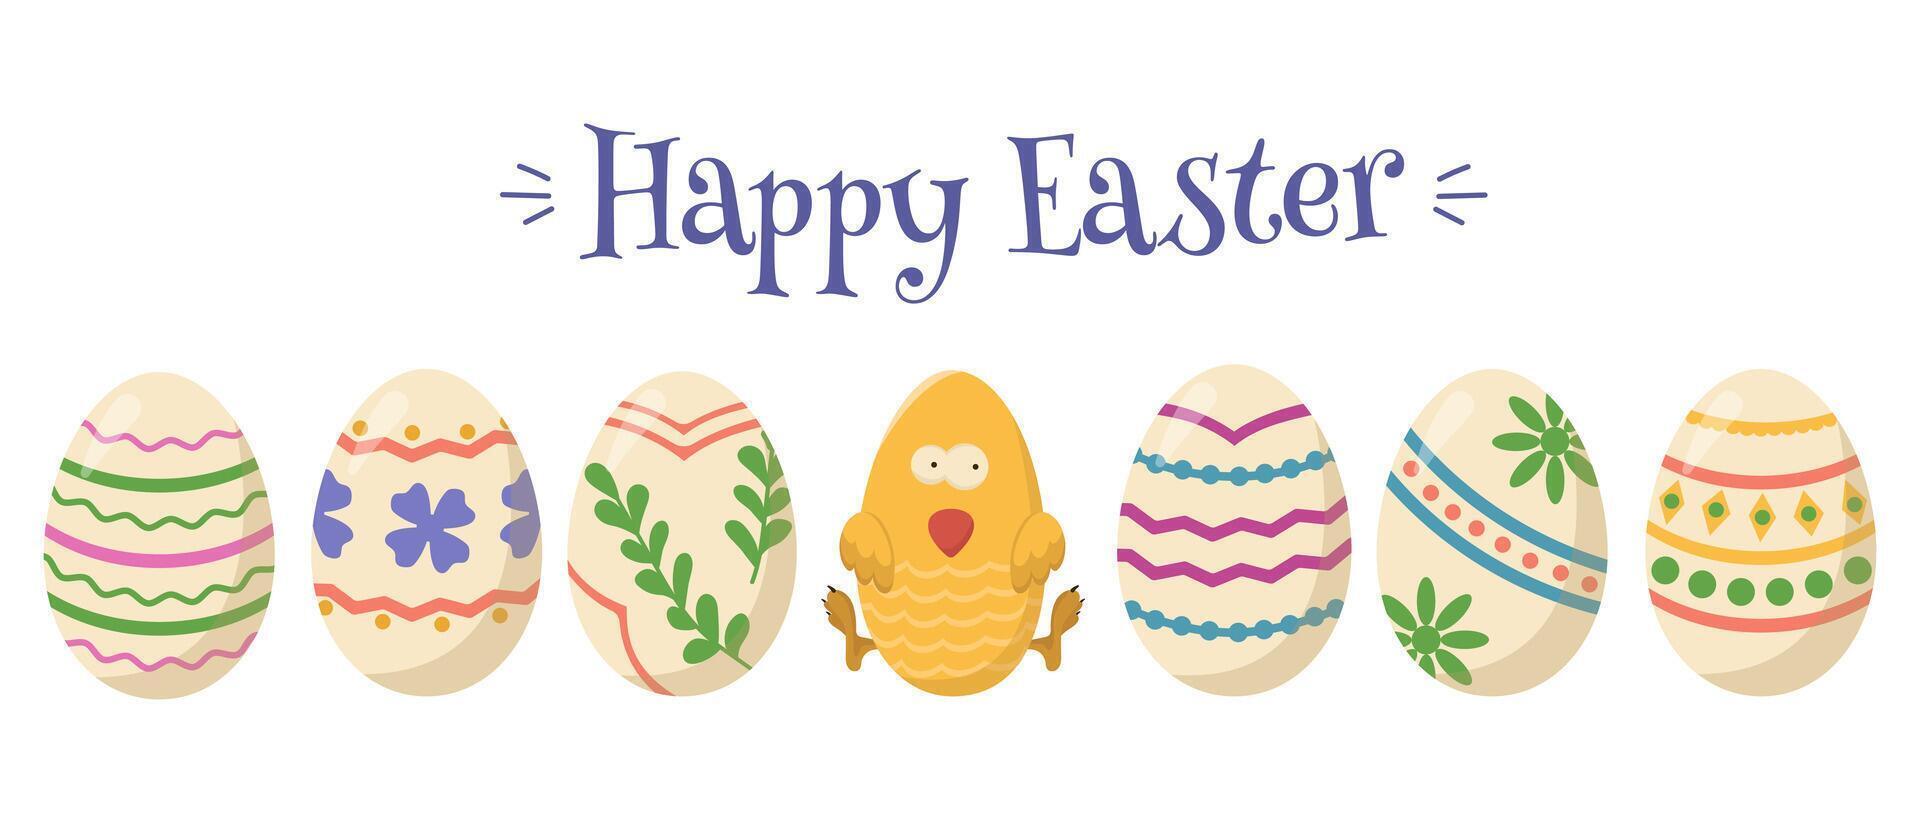 Vector banner with Easter eggs and chick. Set of painted eggs with a yellow chicken on a white background.